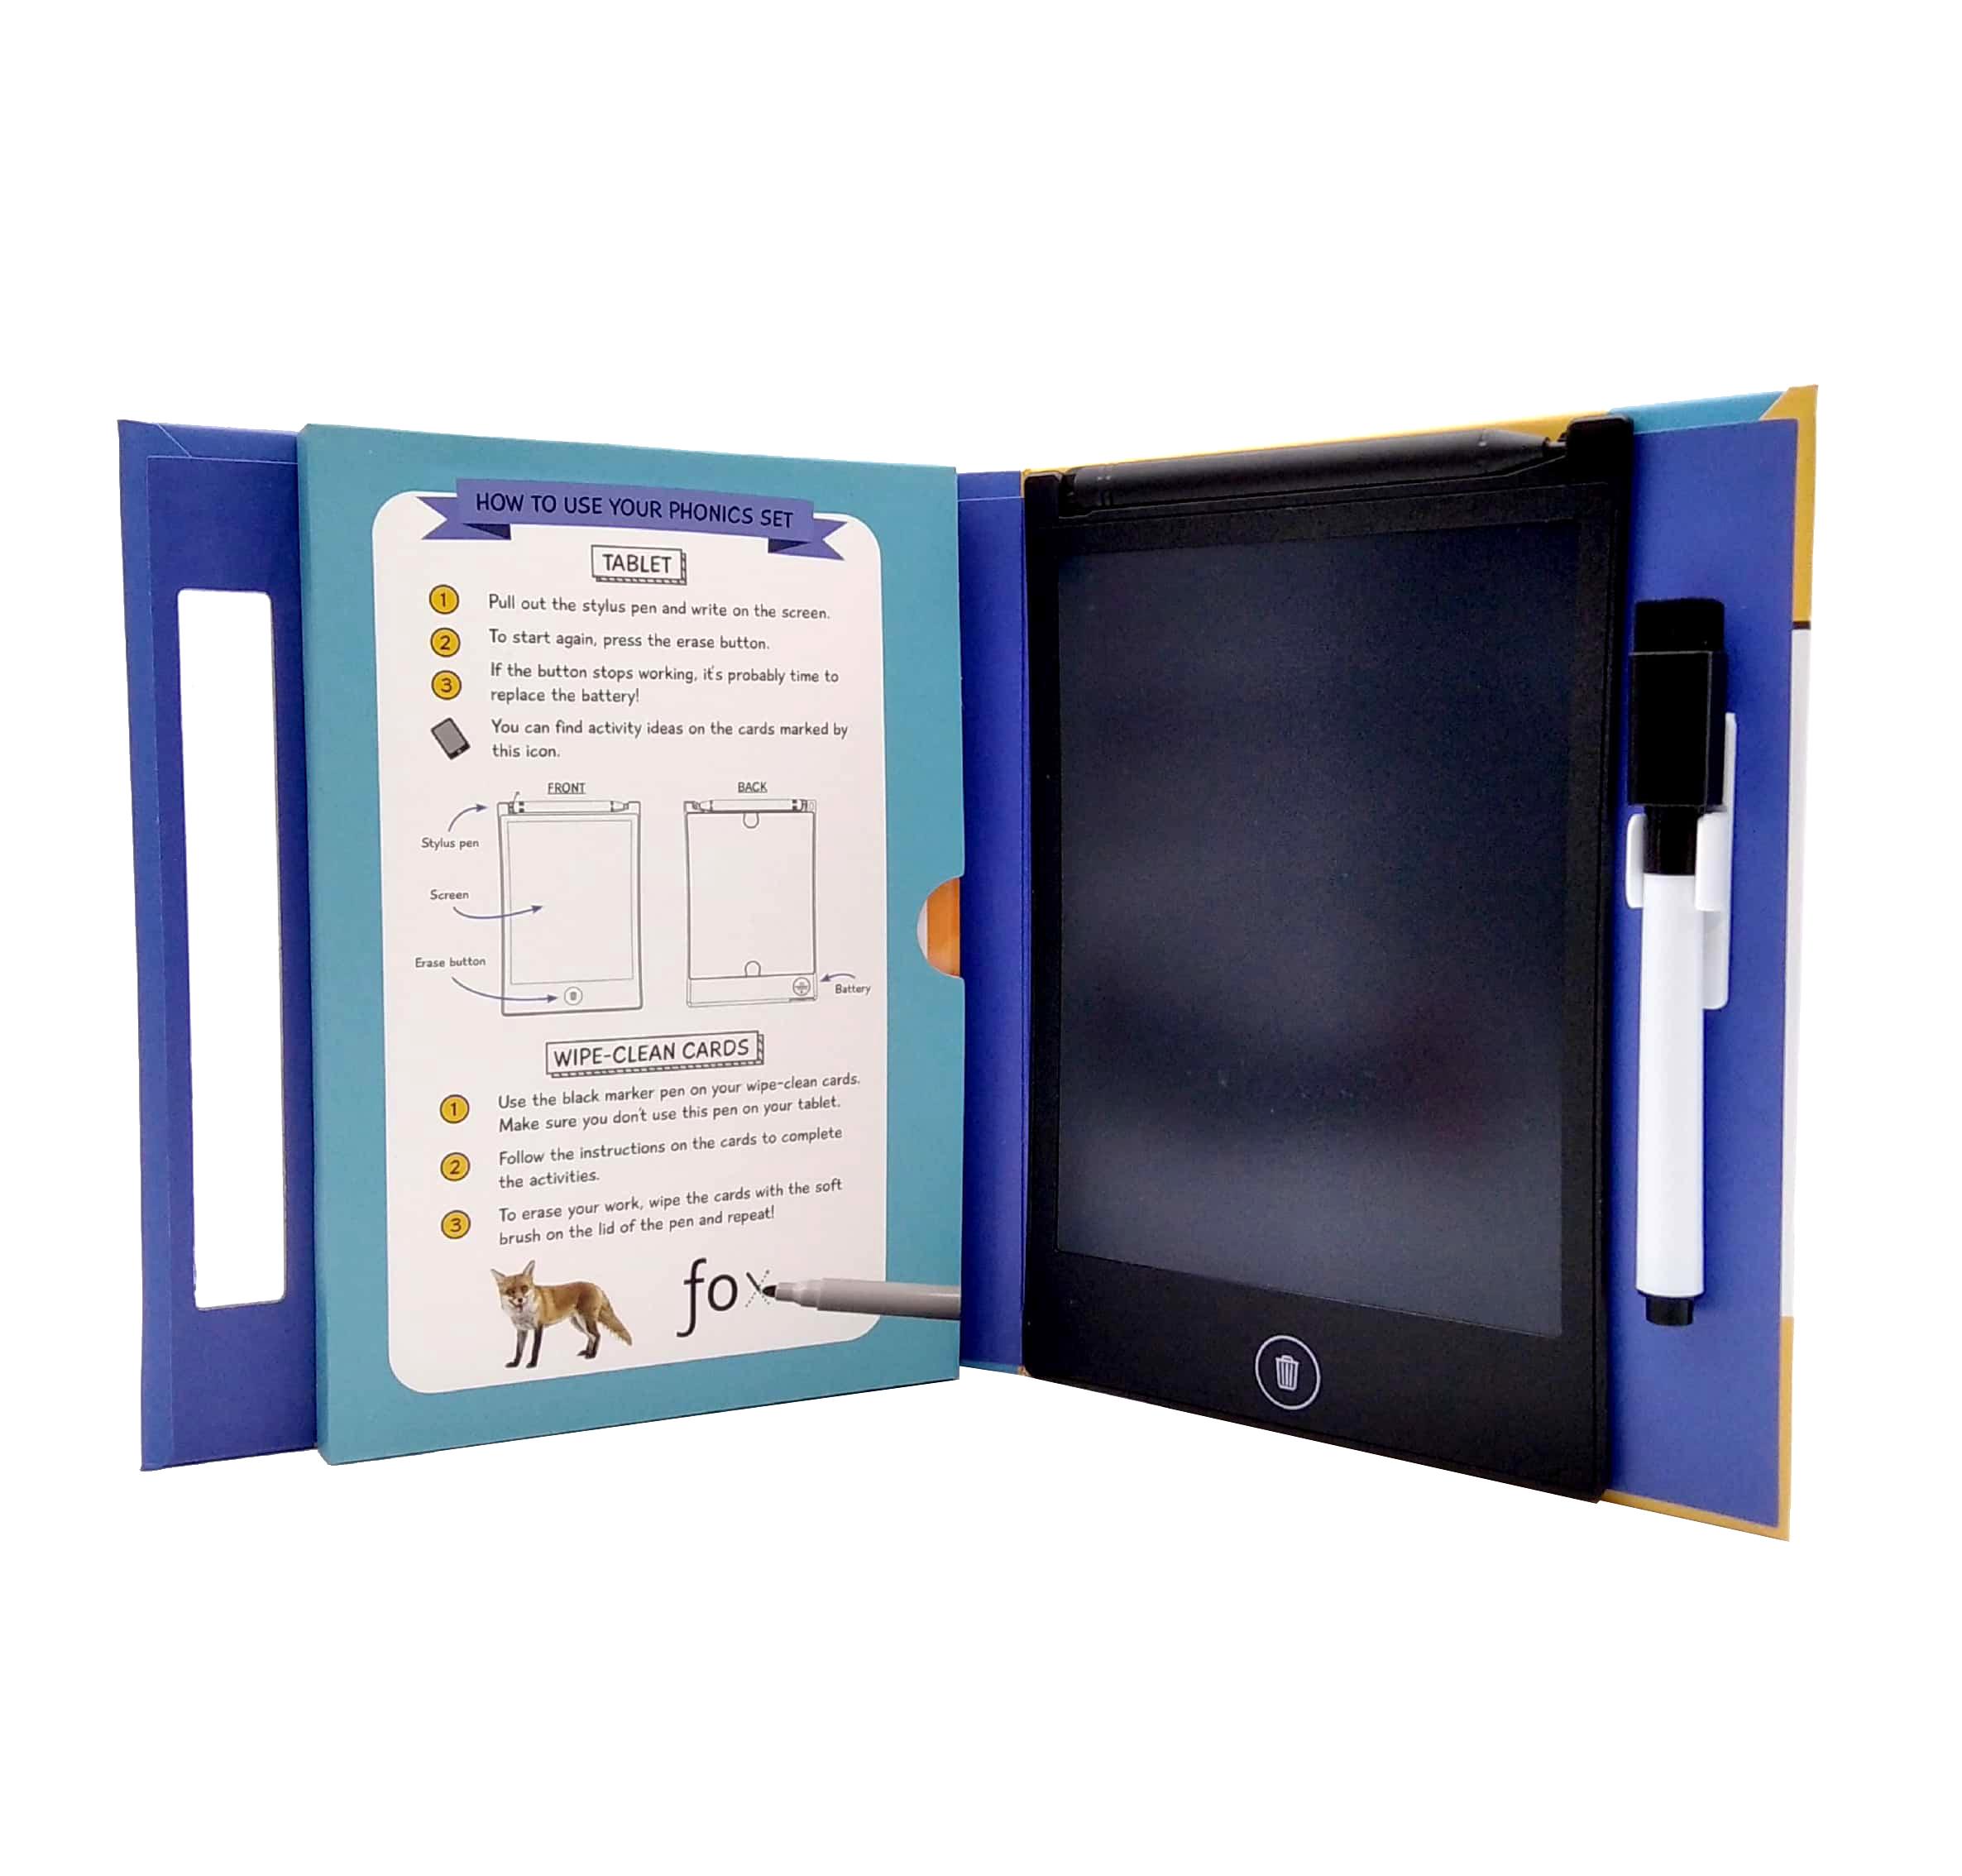 Reception Wipe Clean Cards &amp; LCD Tablet: Phonics